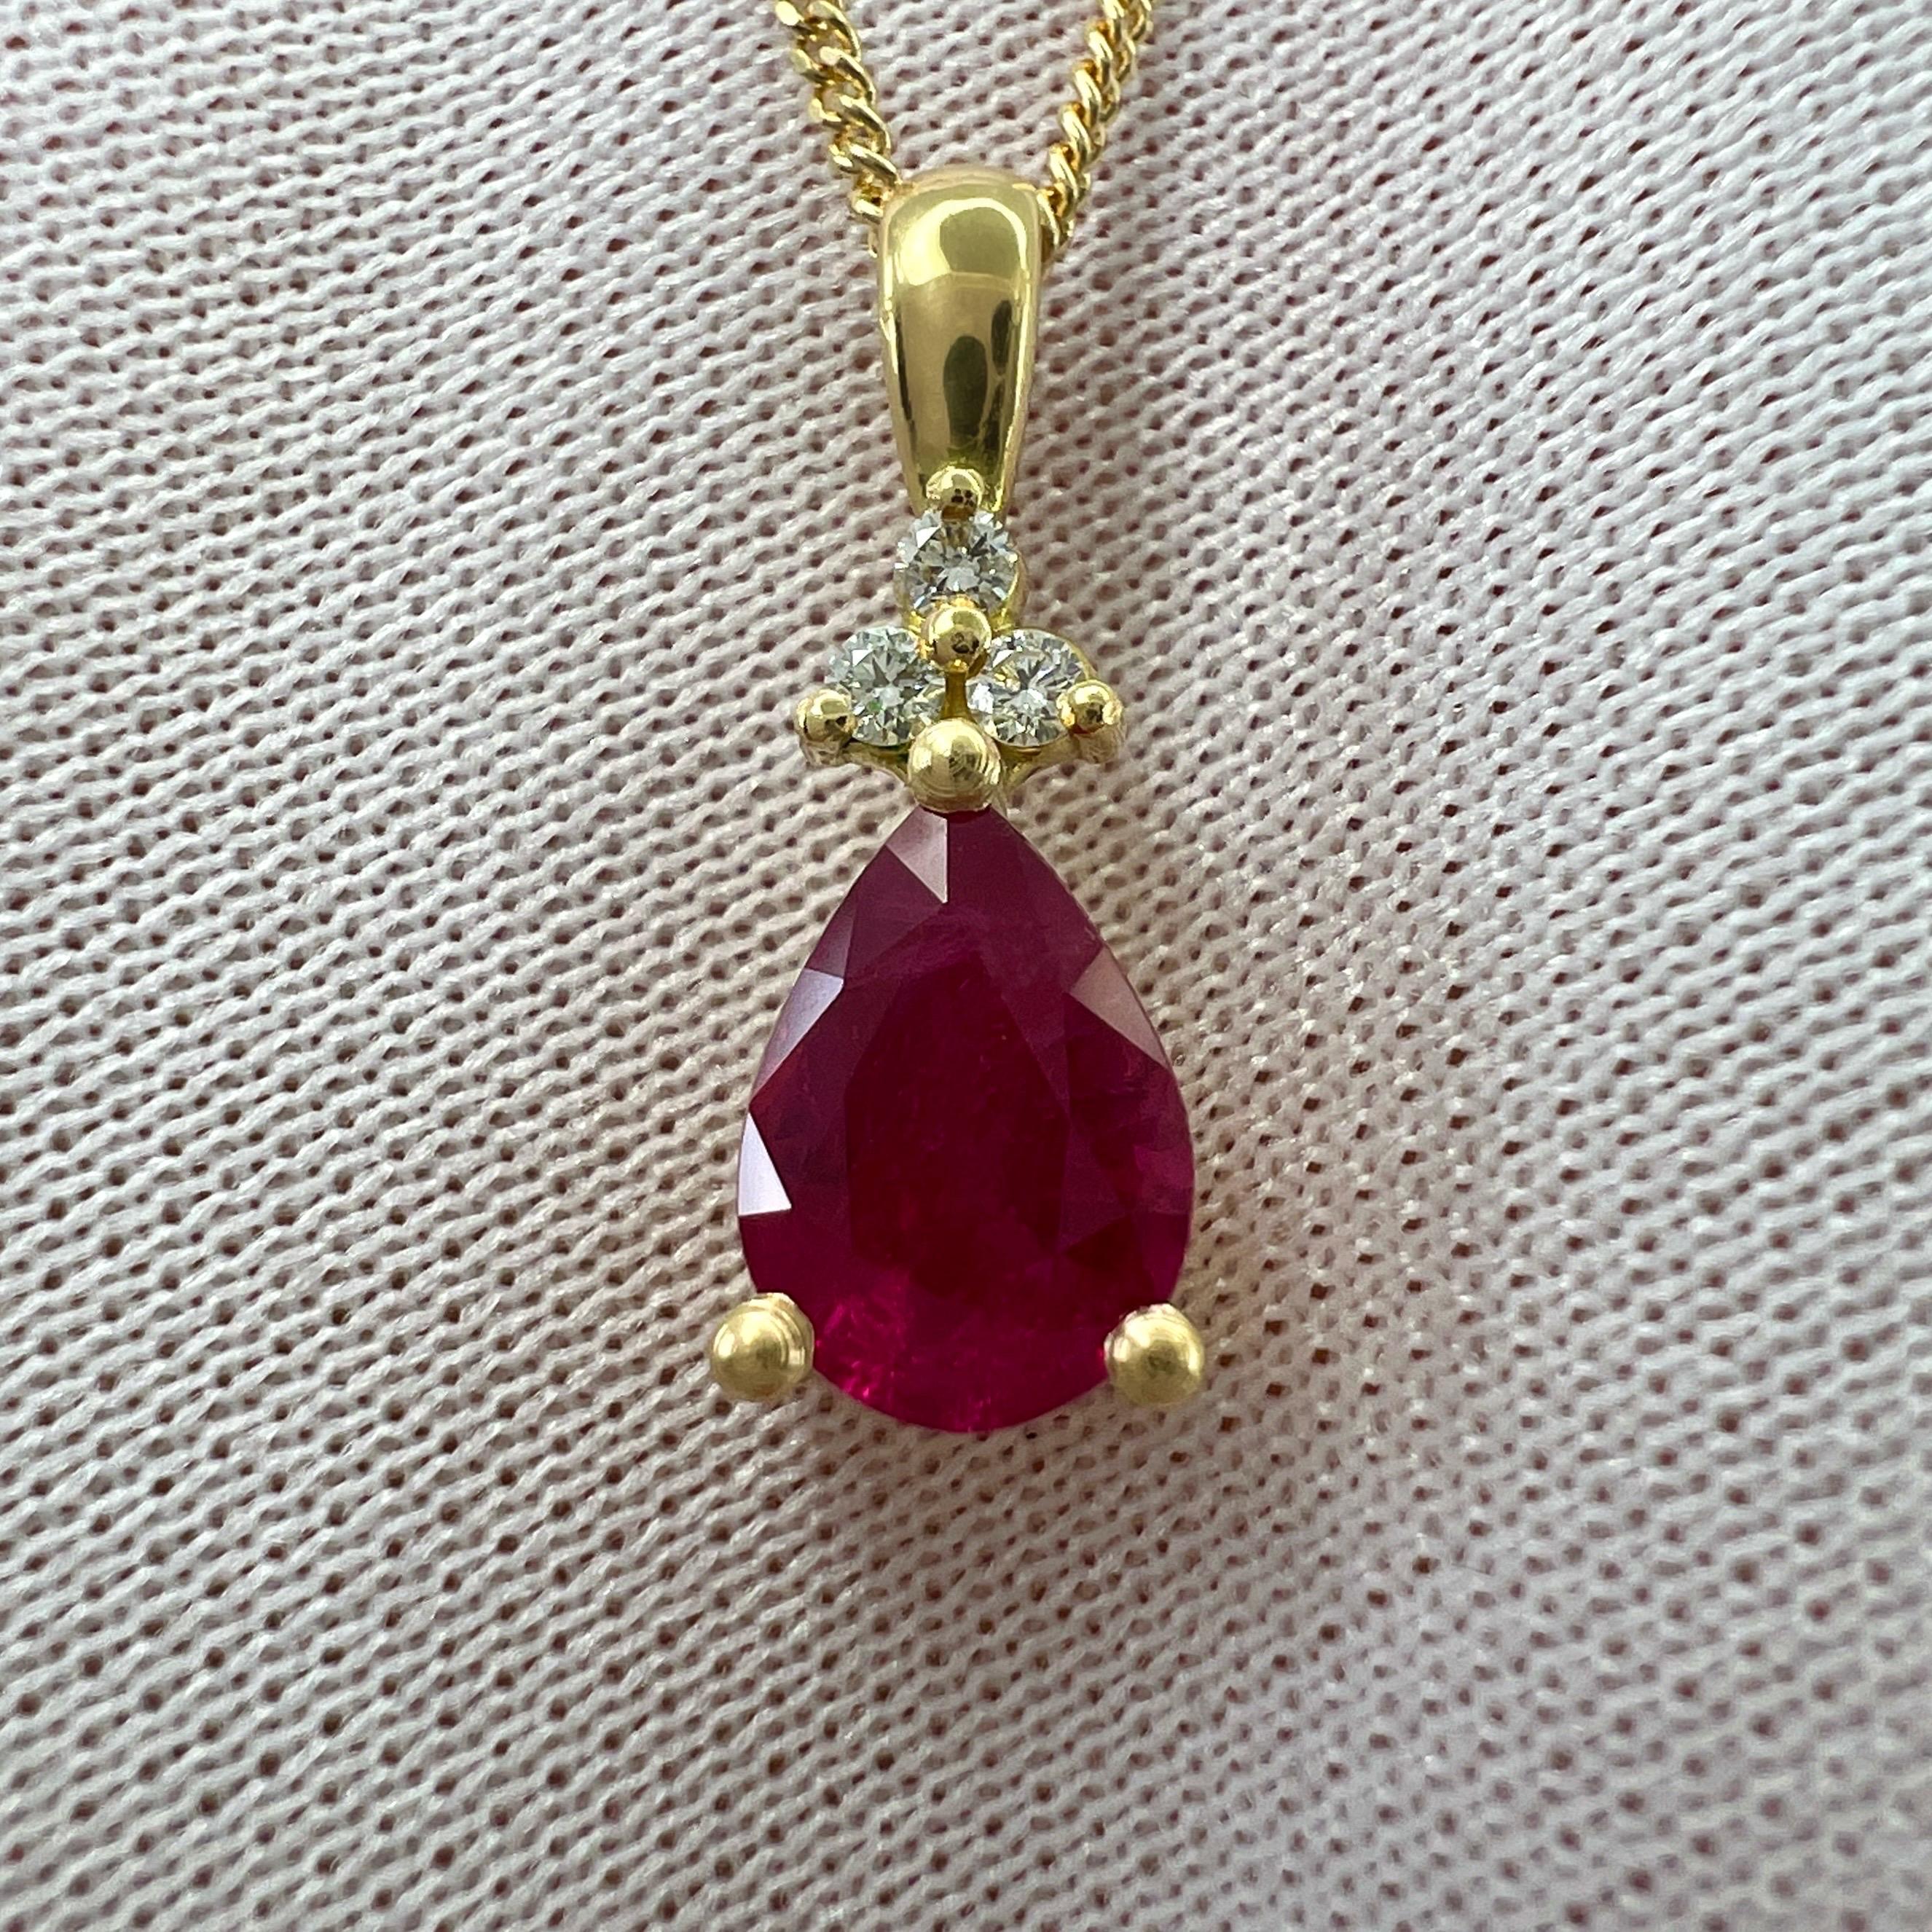 Natural 1.37ct Pear Cut Ruby And Diamond 18k Yellow Gold Pendant Necklace For Sale 7